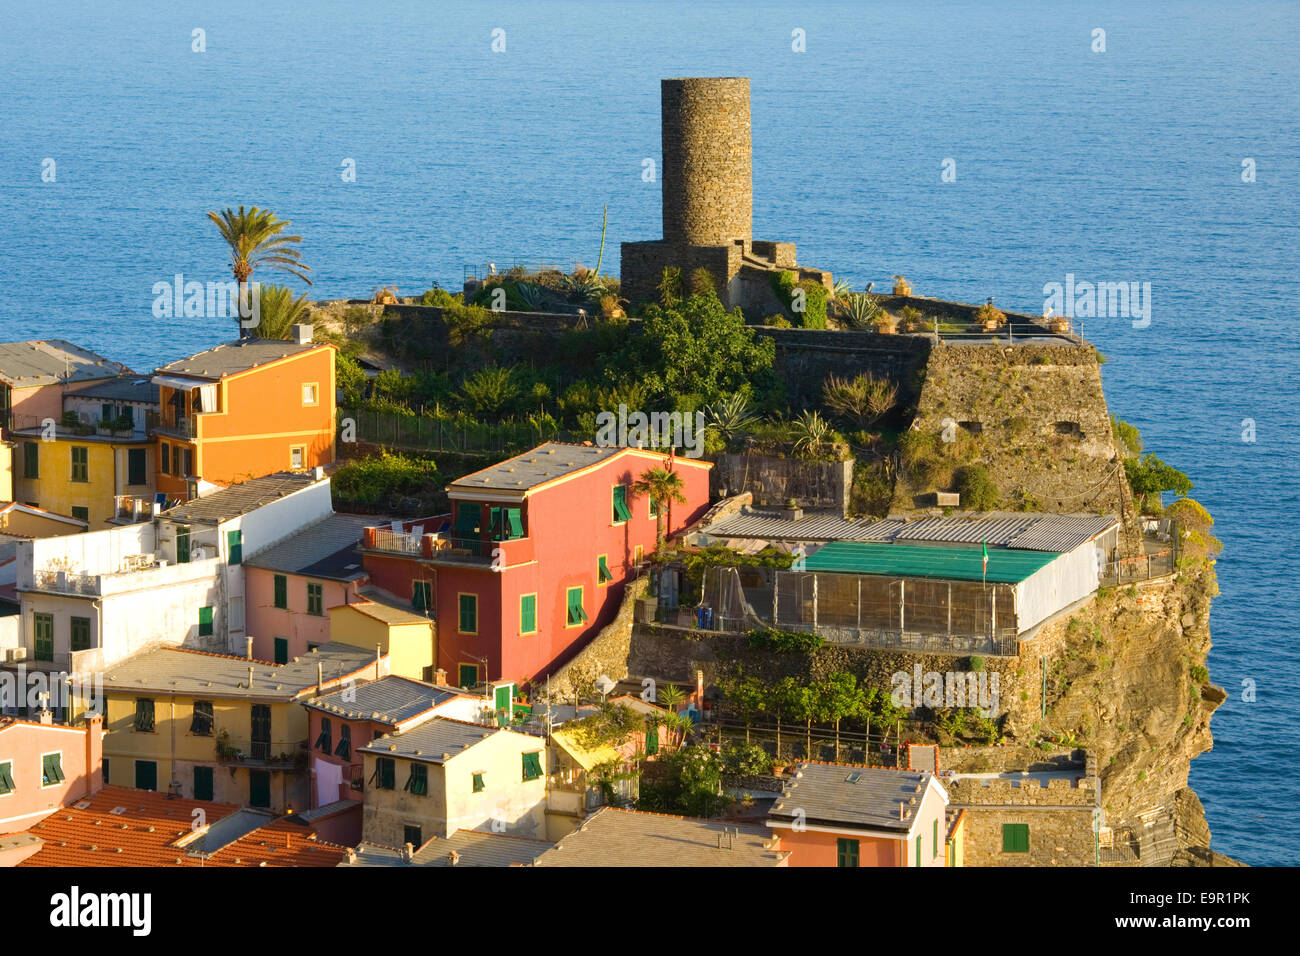 Vernazza, Cinque Terre National Park, Liguria, Italy. 15th century watchtower and colourful clifftop houses. Stock Photo